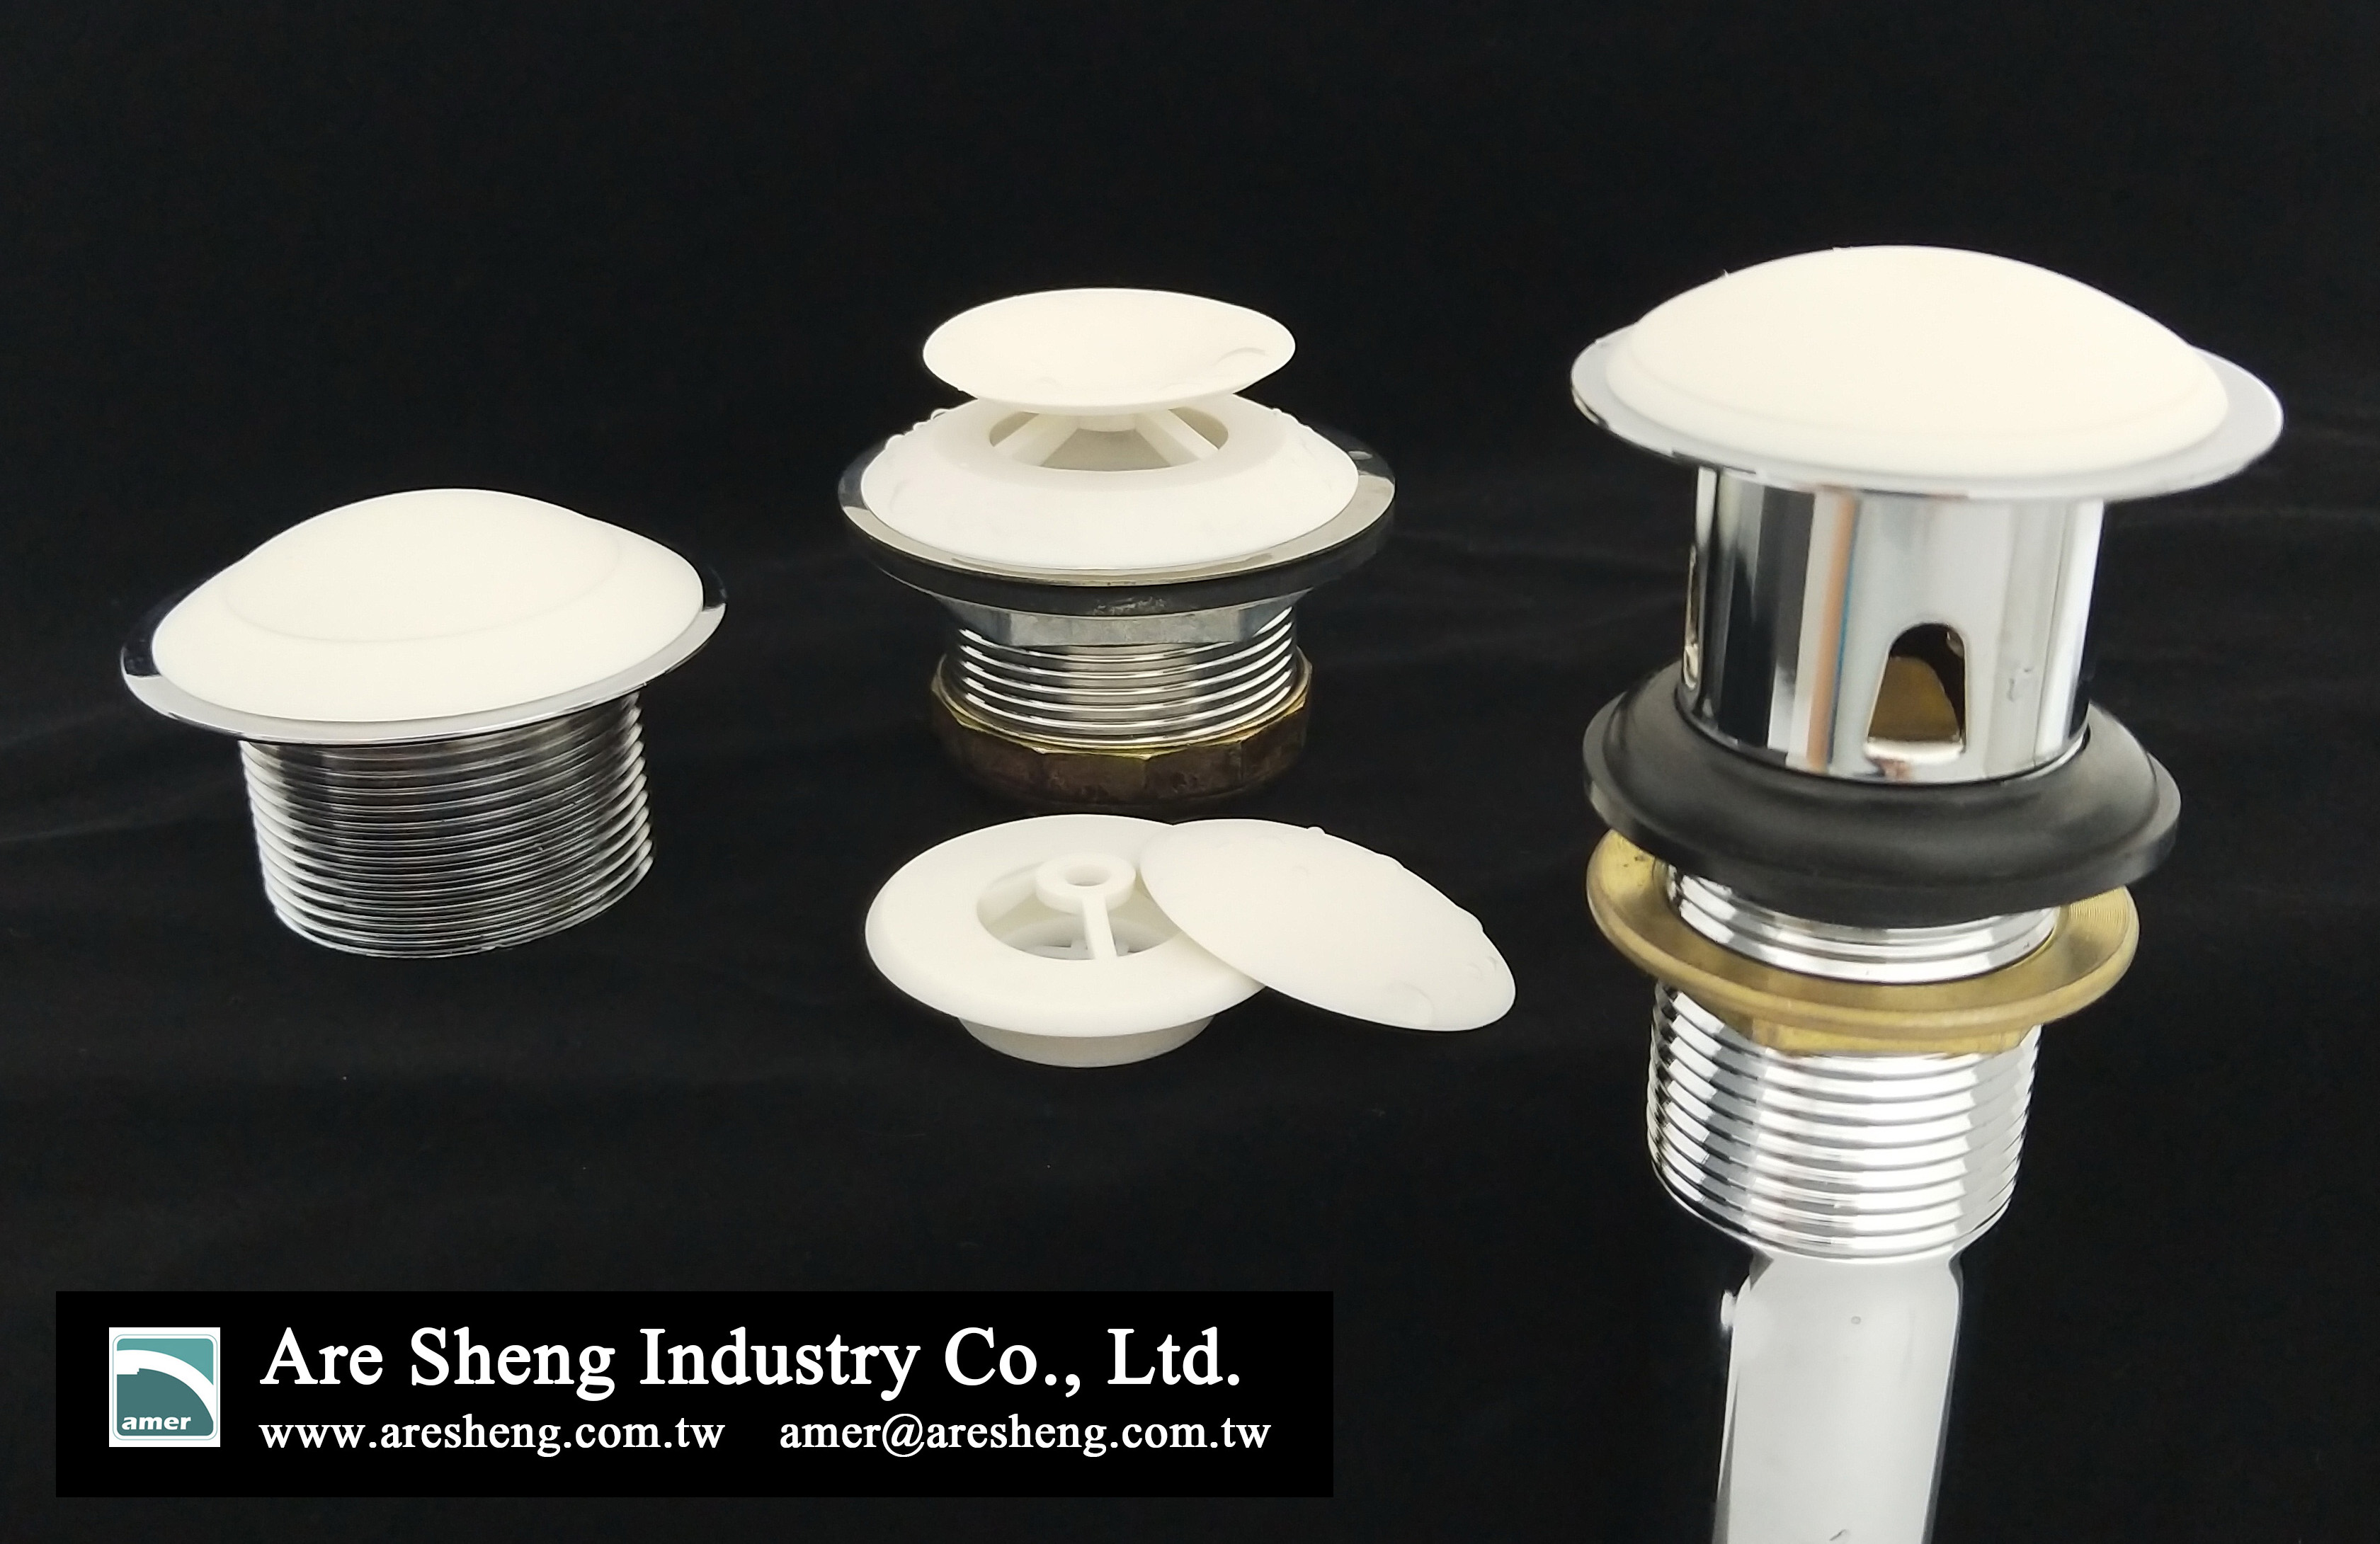 https://www.aresheng.com.tw/upload_files/A41-001/Universal_new_release_drain_plug-_Are_Sheng.jpg